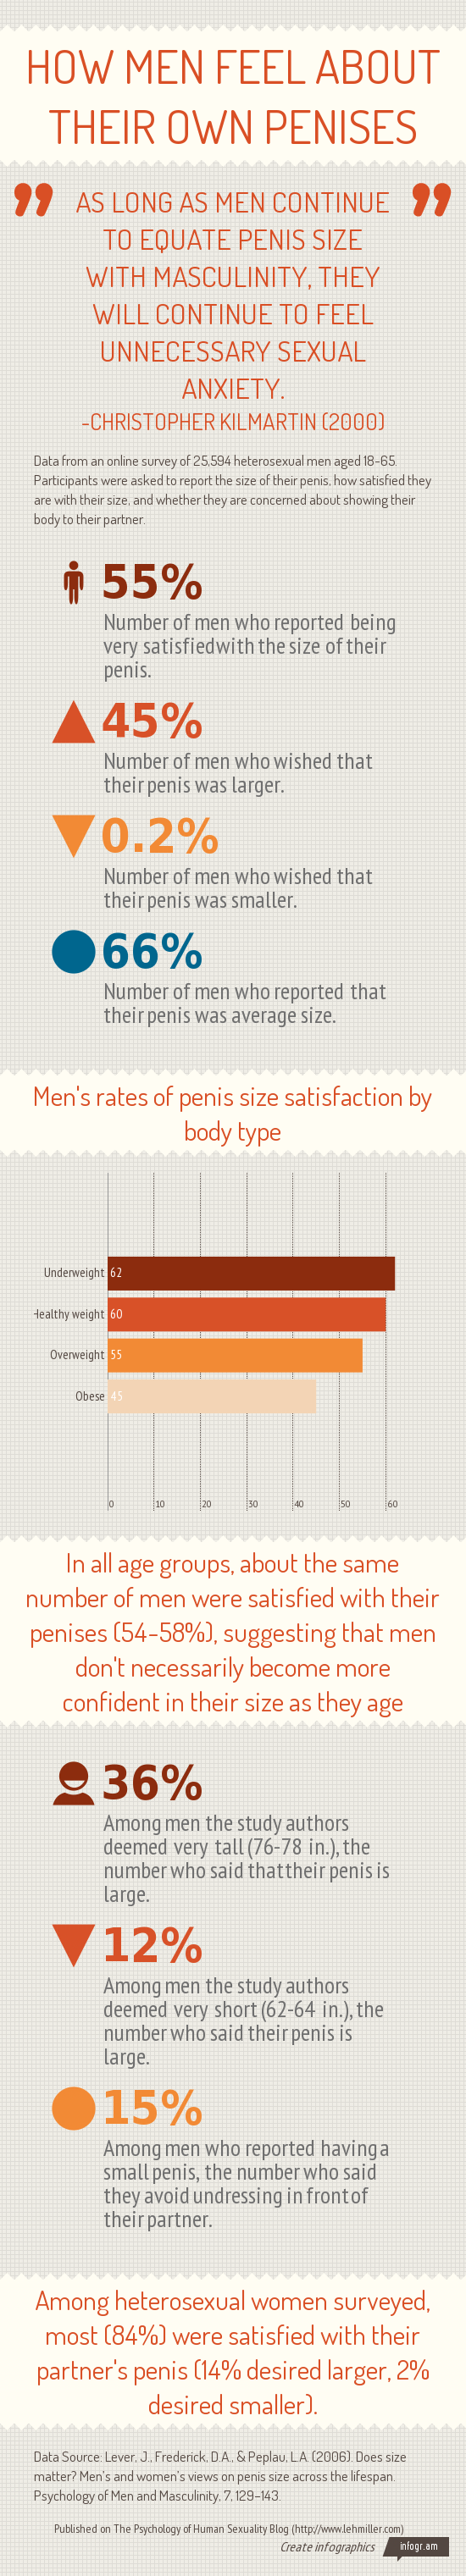 Infographic showing data on how men feel about their own penises